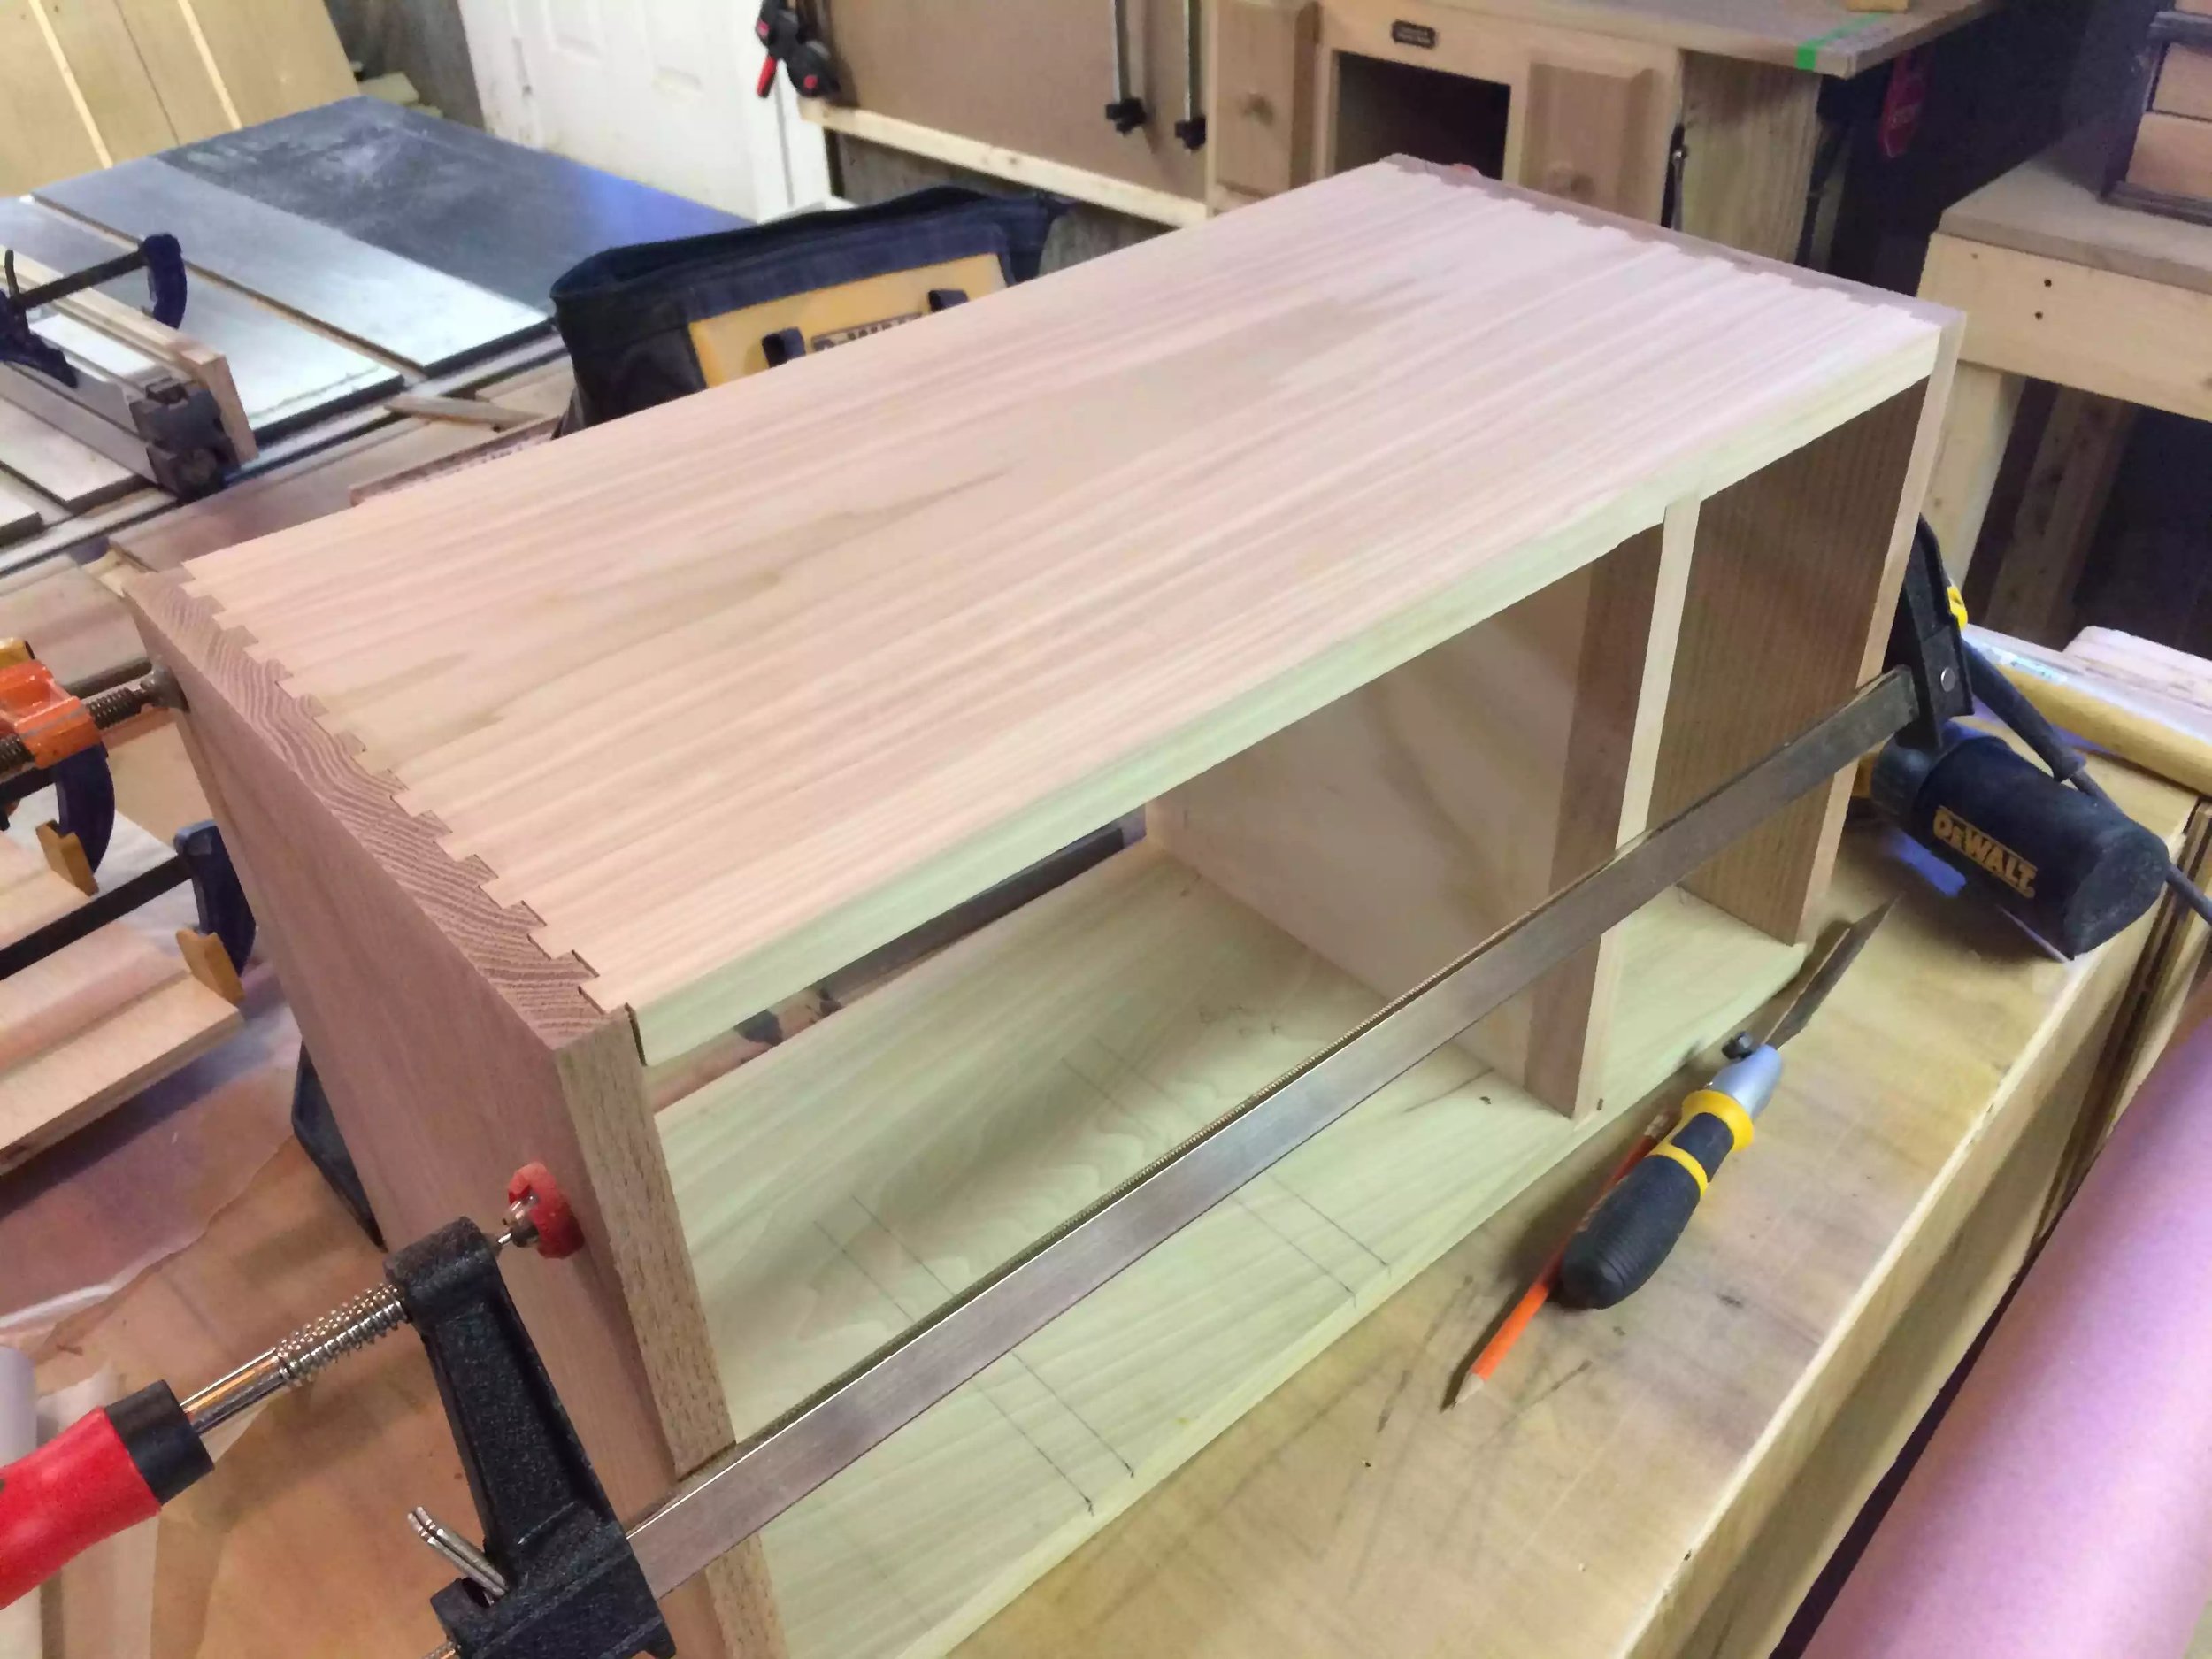 The glue up